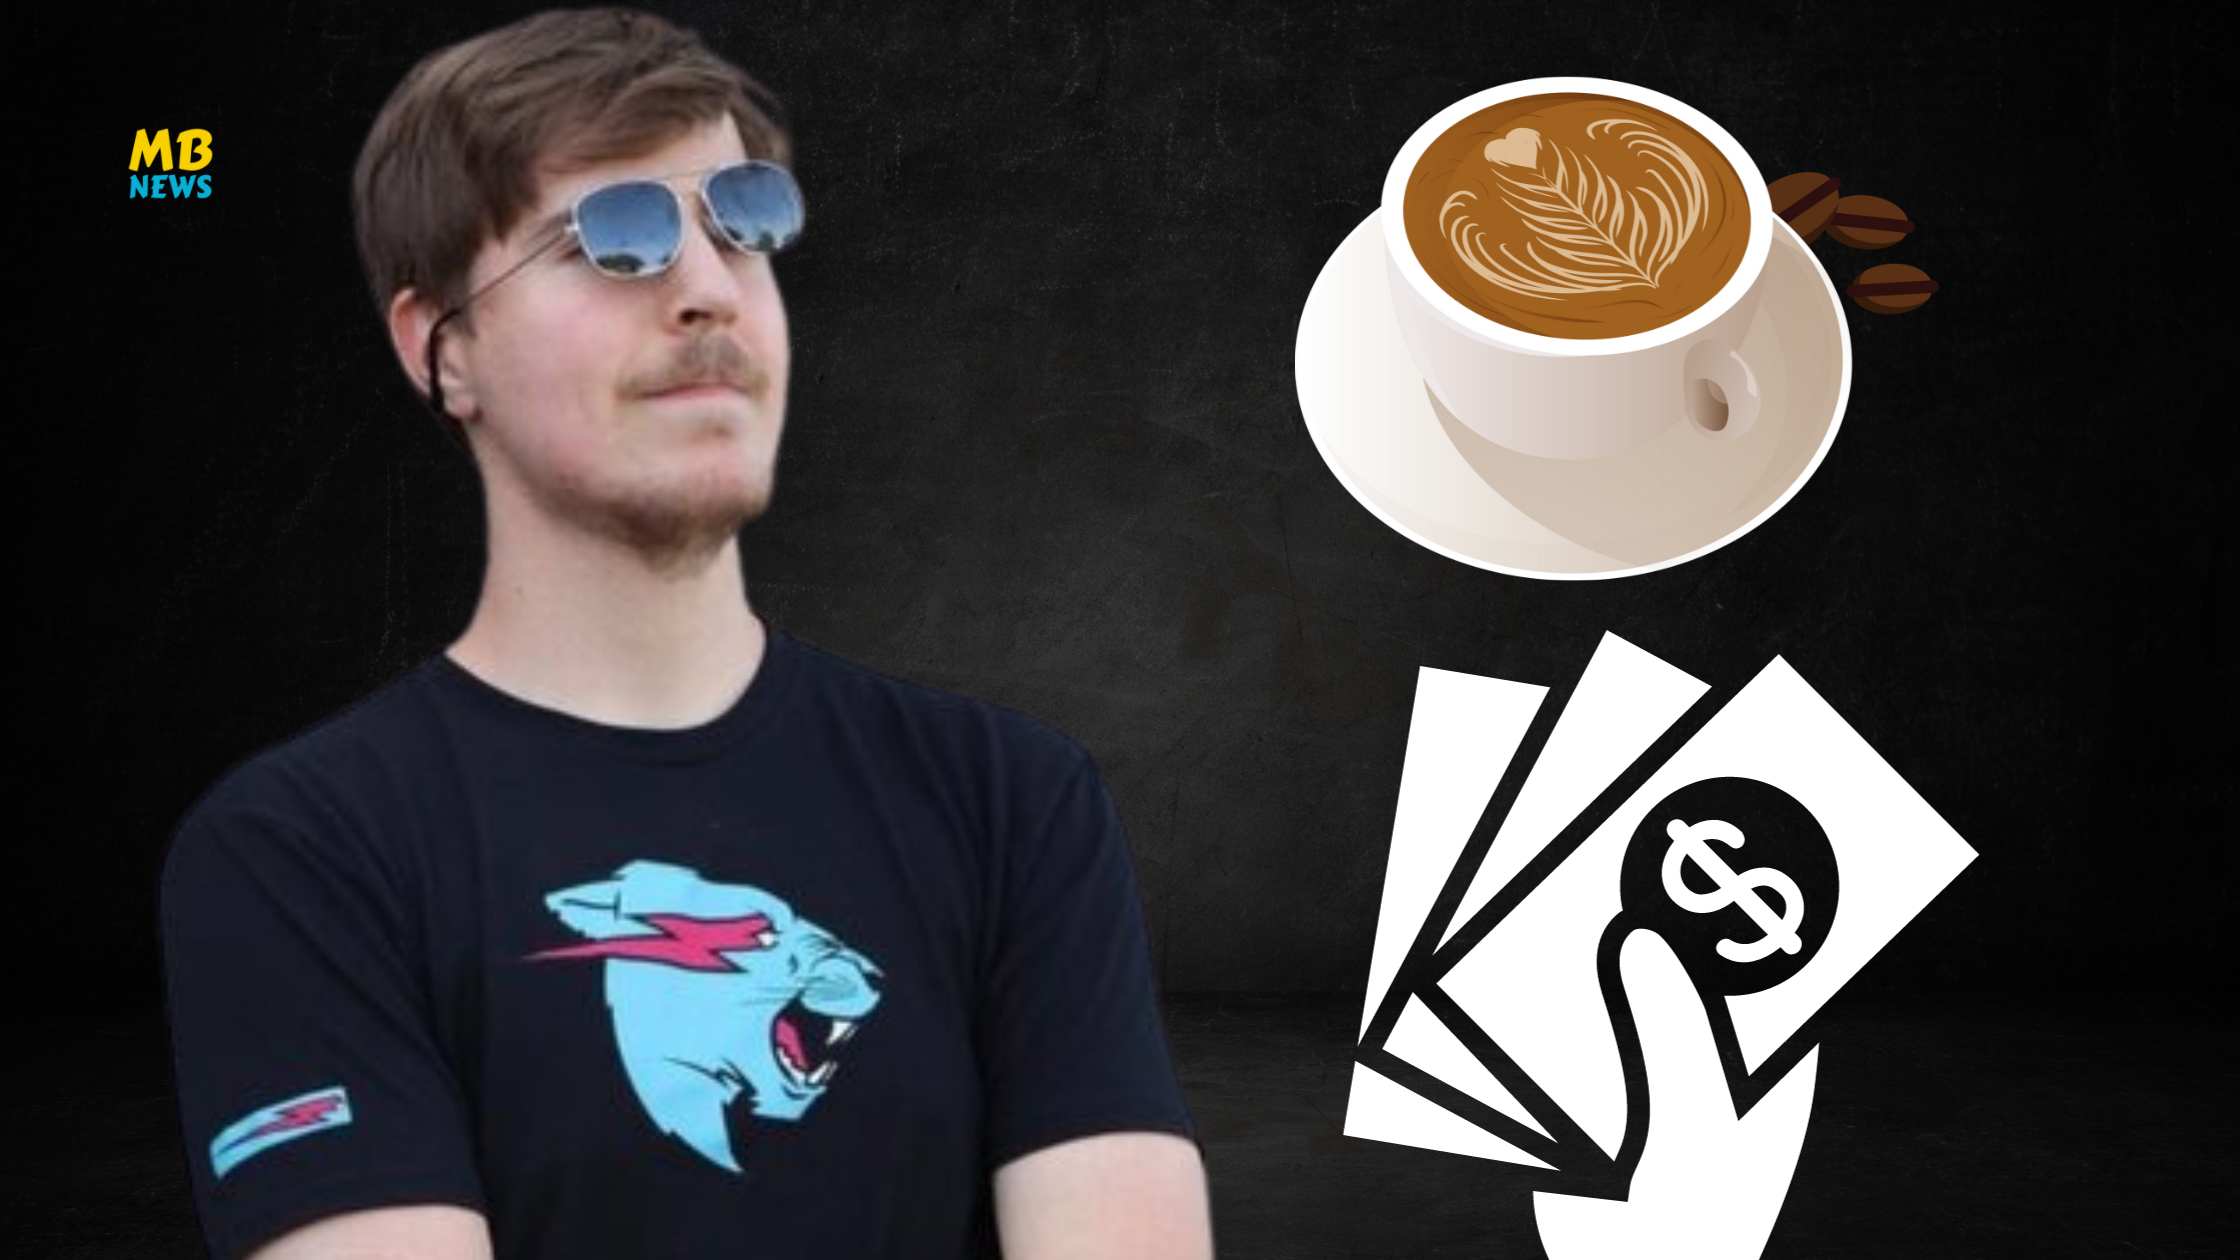 MrBeast Explores the World's Most Expensive Coffee Made from Elephant-Digested Beans!